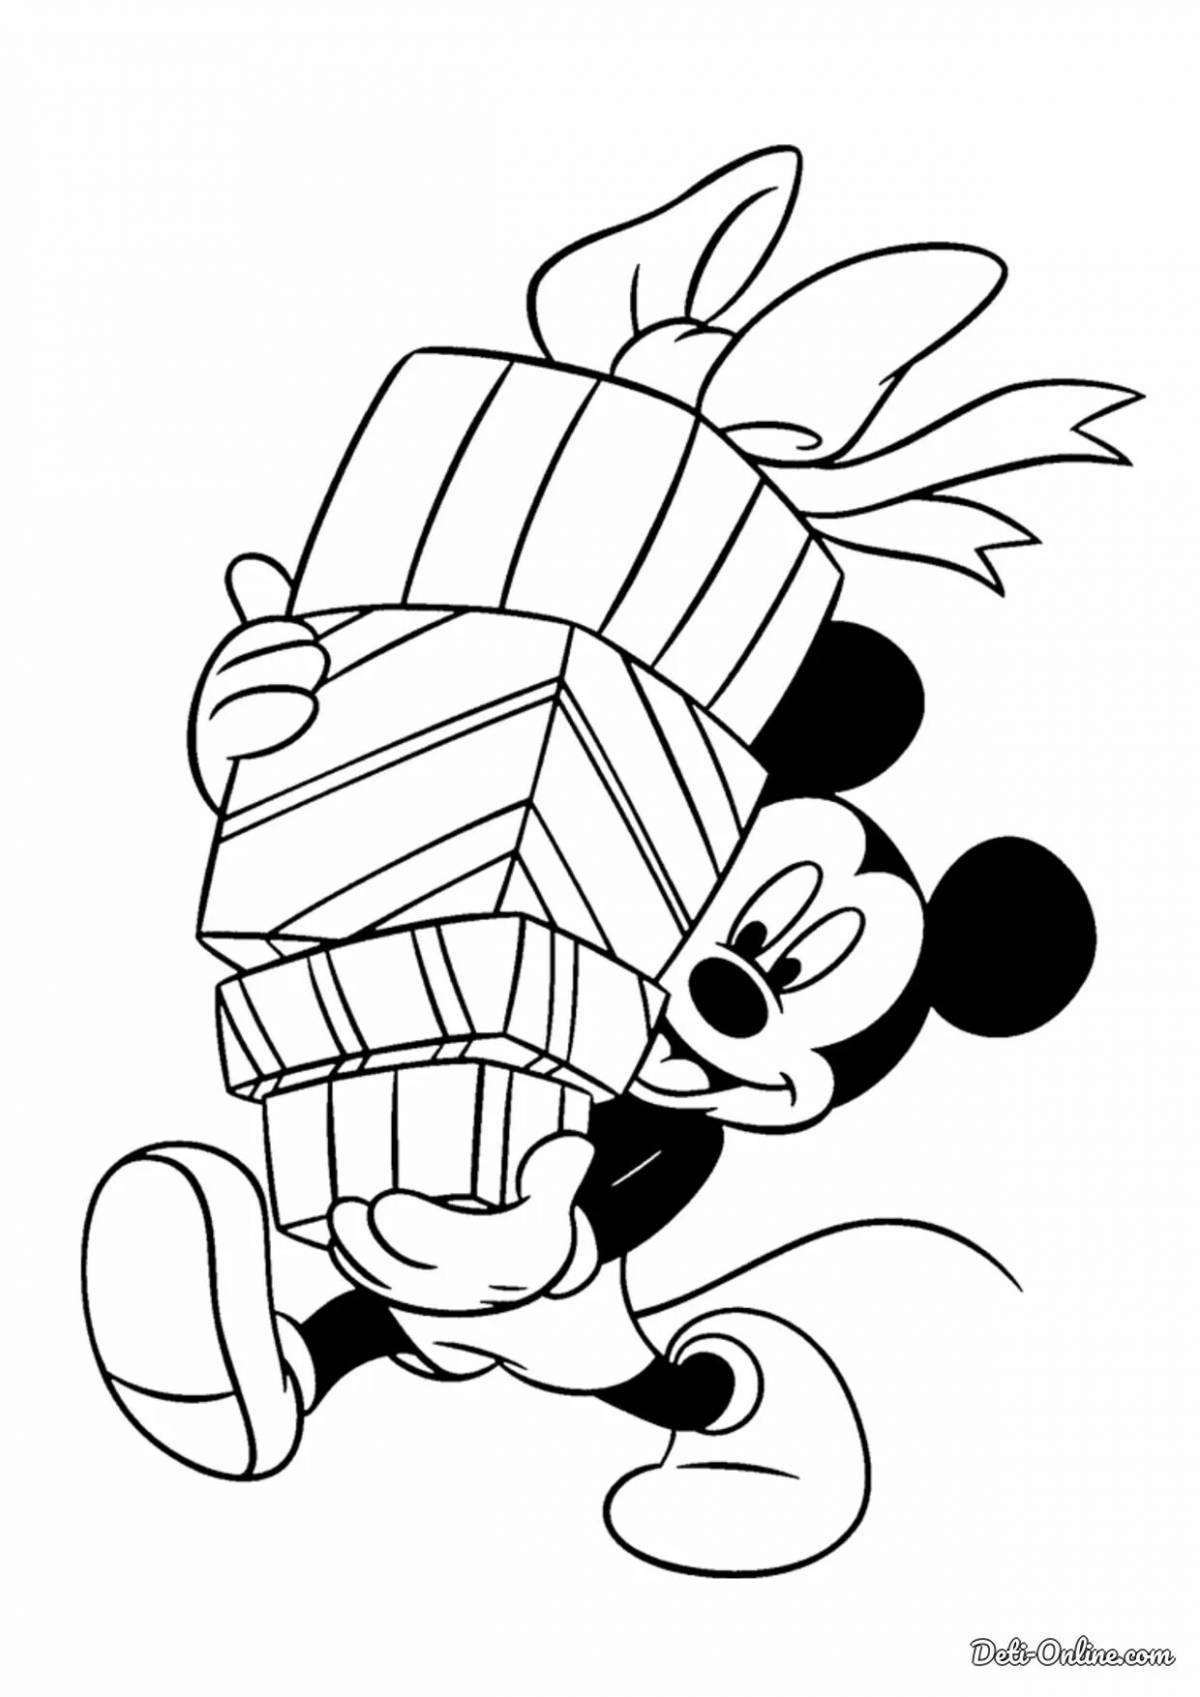 Luminous Mickey Mouse Christmas coloring book